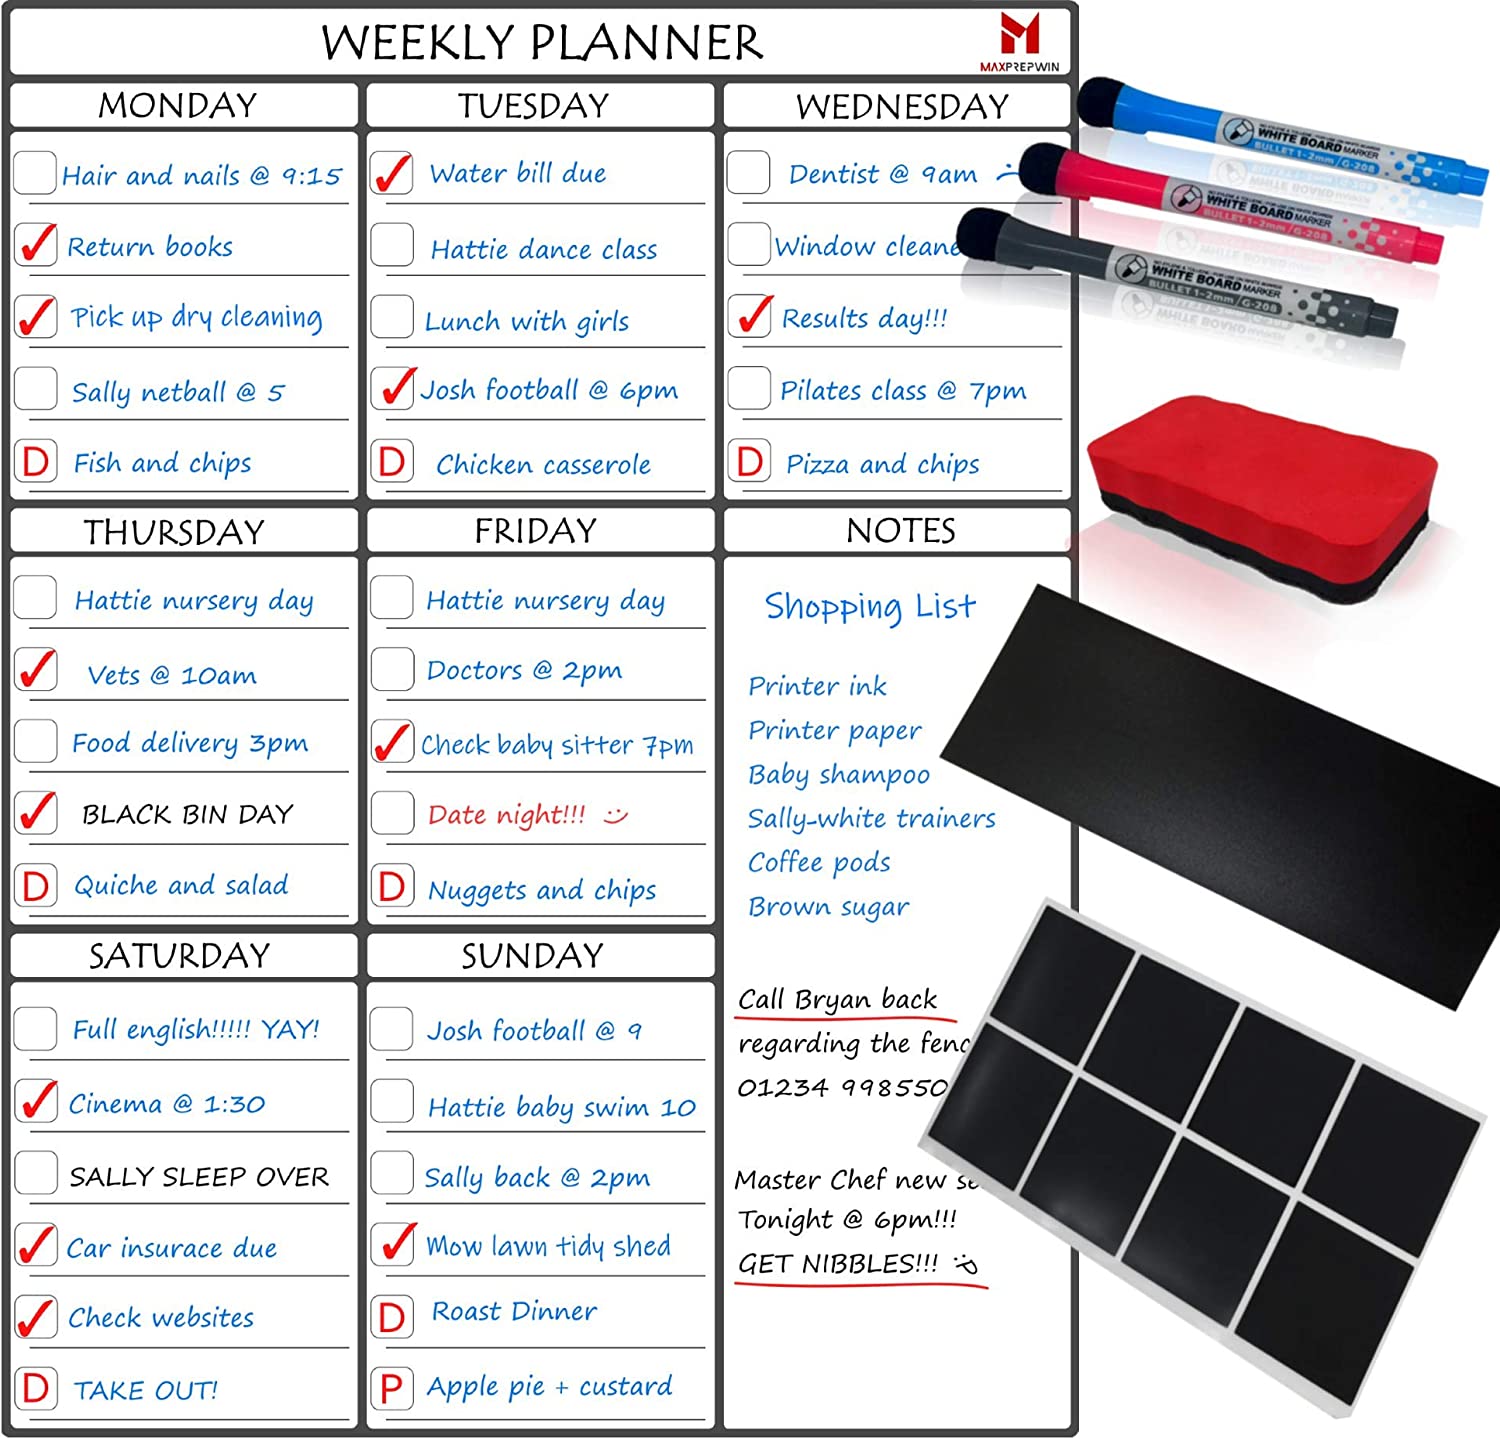 Max Prep Win Magnetic Weekly Planner Whiteboard RRP 13.89 CLEARANCE XL 9.99